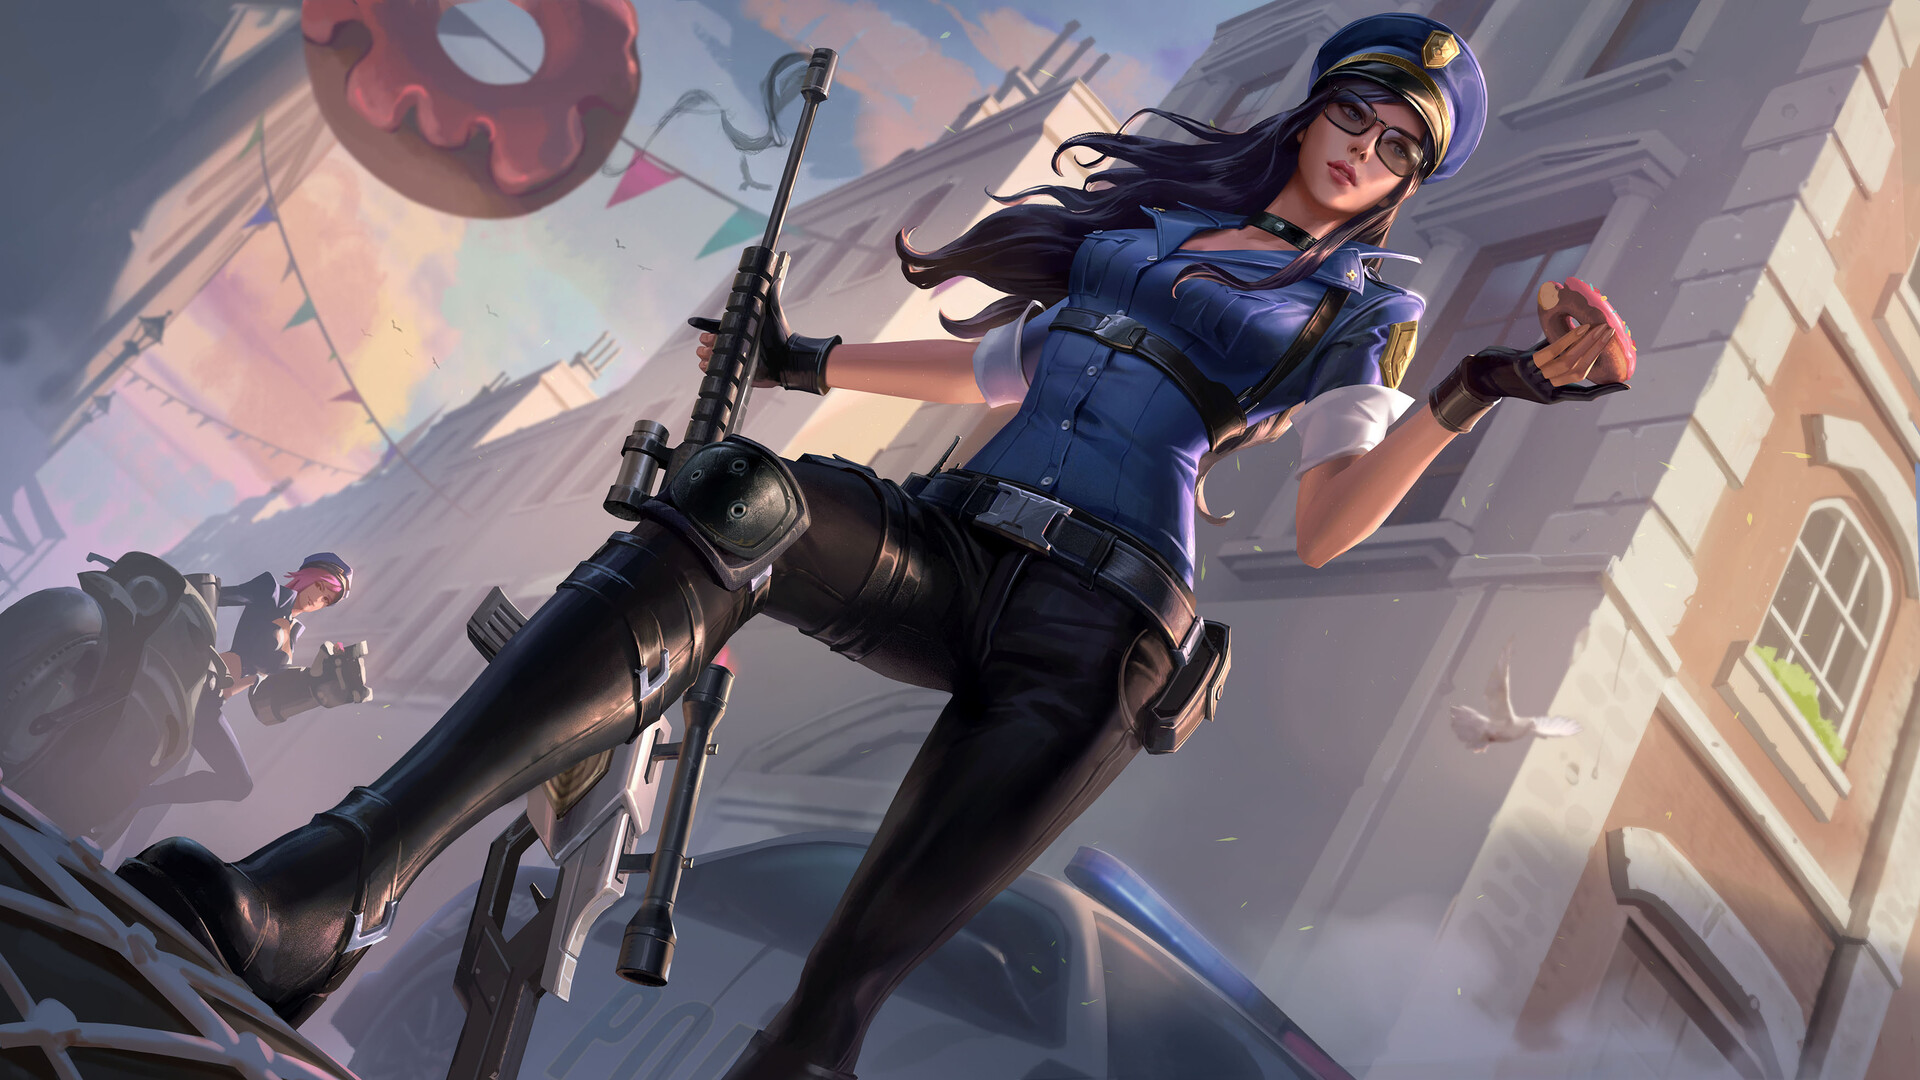 General 1920x1080 Edward Chee drawing League of Legends Caitlyn (League of Legends) women police costume low-angle weapon sniper rifle city Vi (League of Legends) donut digital art